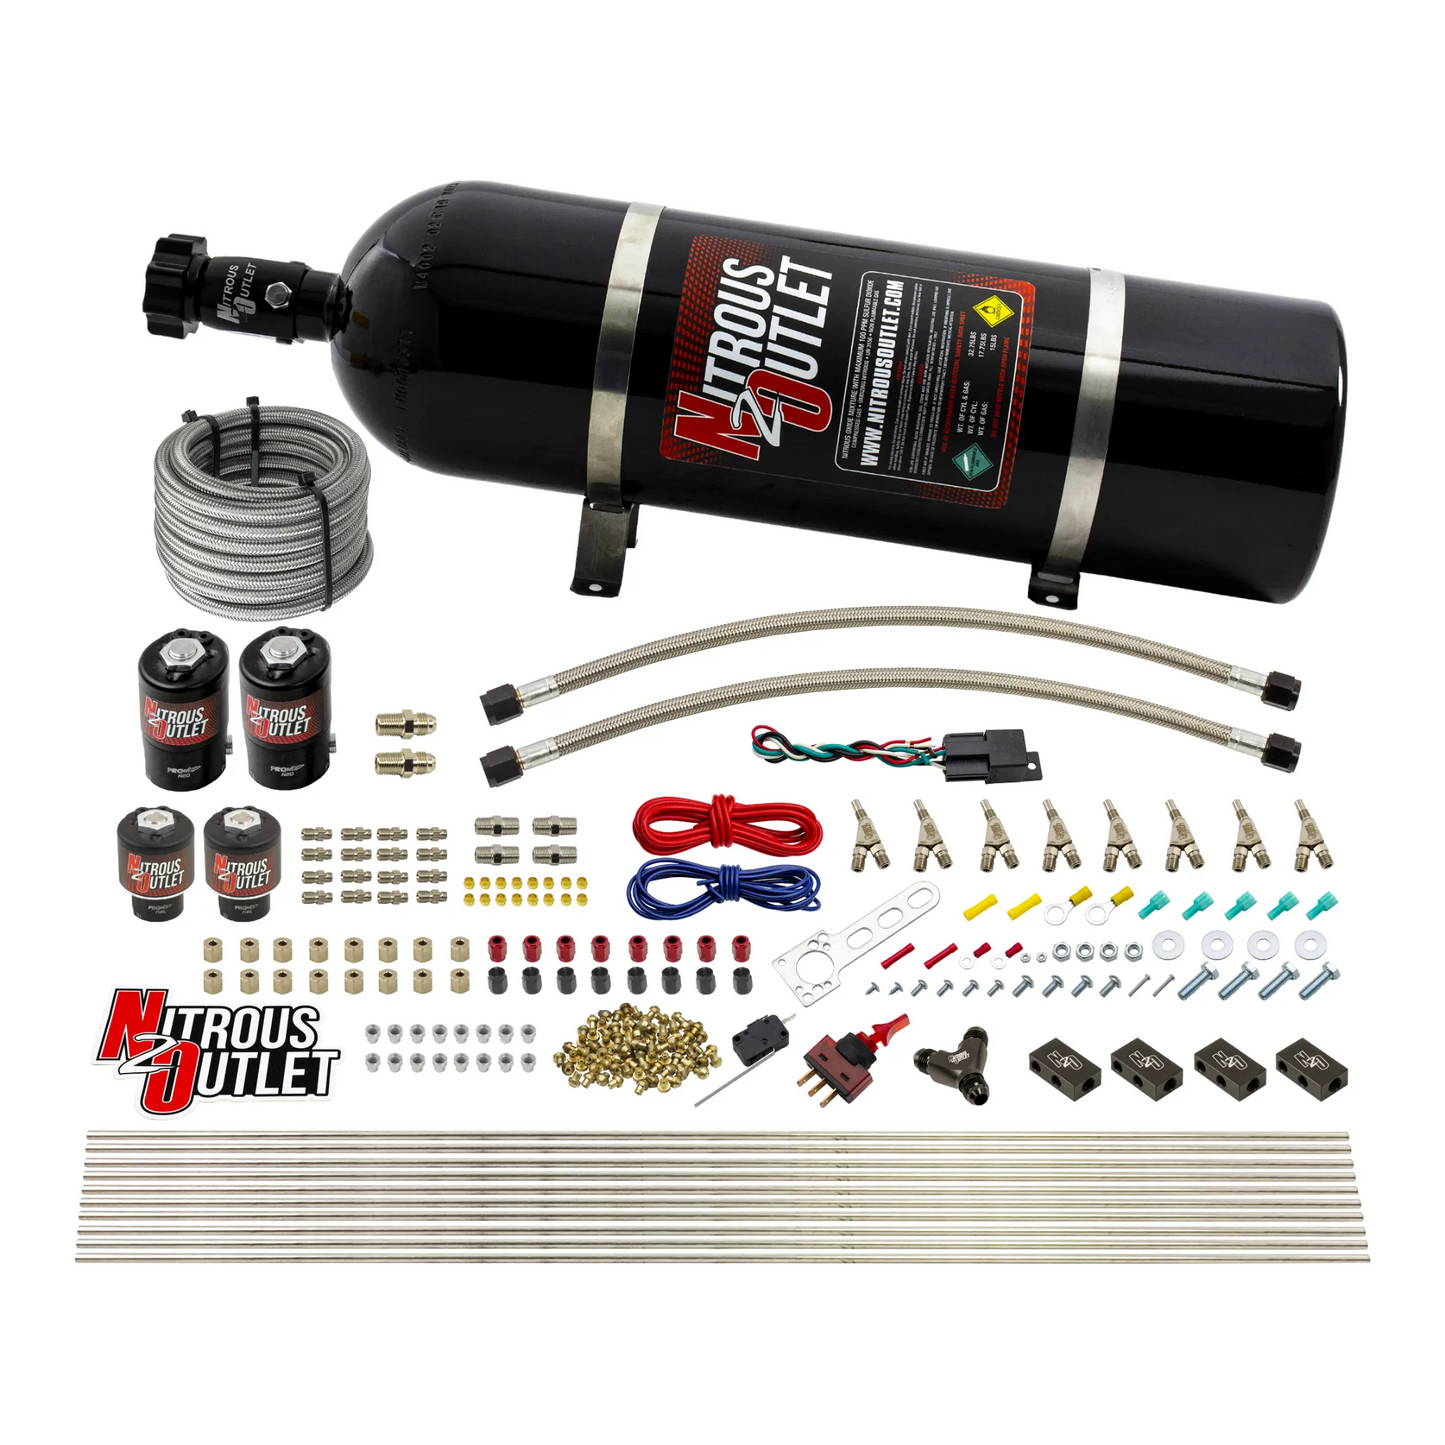 8 Cylinder Single Stage Direct Port Nitrous System - .112 Nitrous/.177 Fuel Solenoids - Straight Blow Through Nozzles